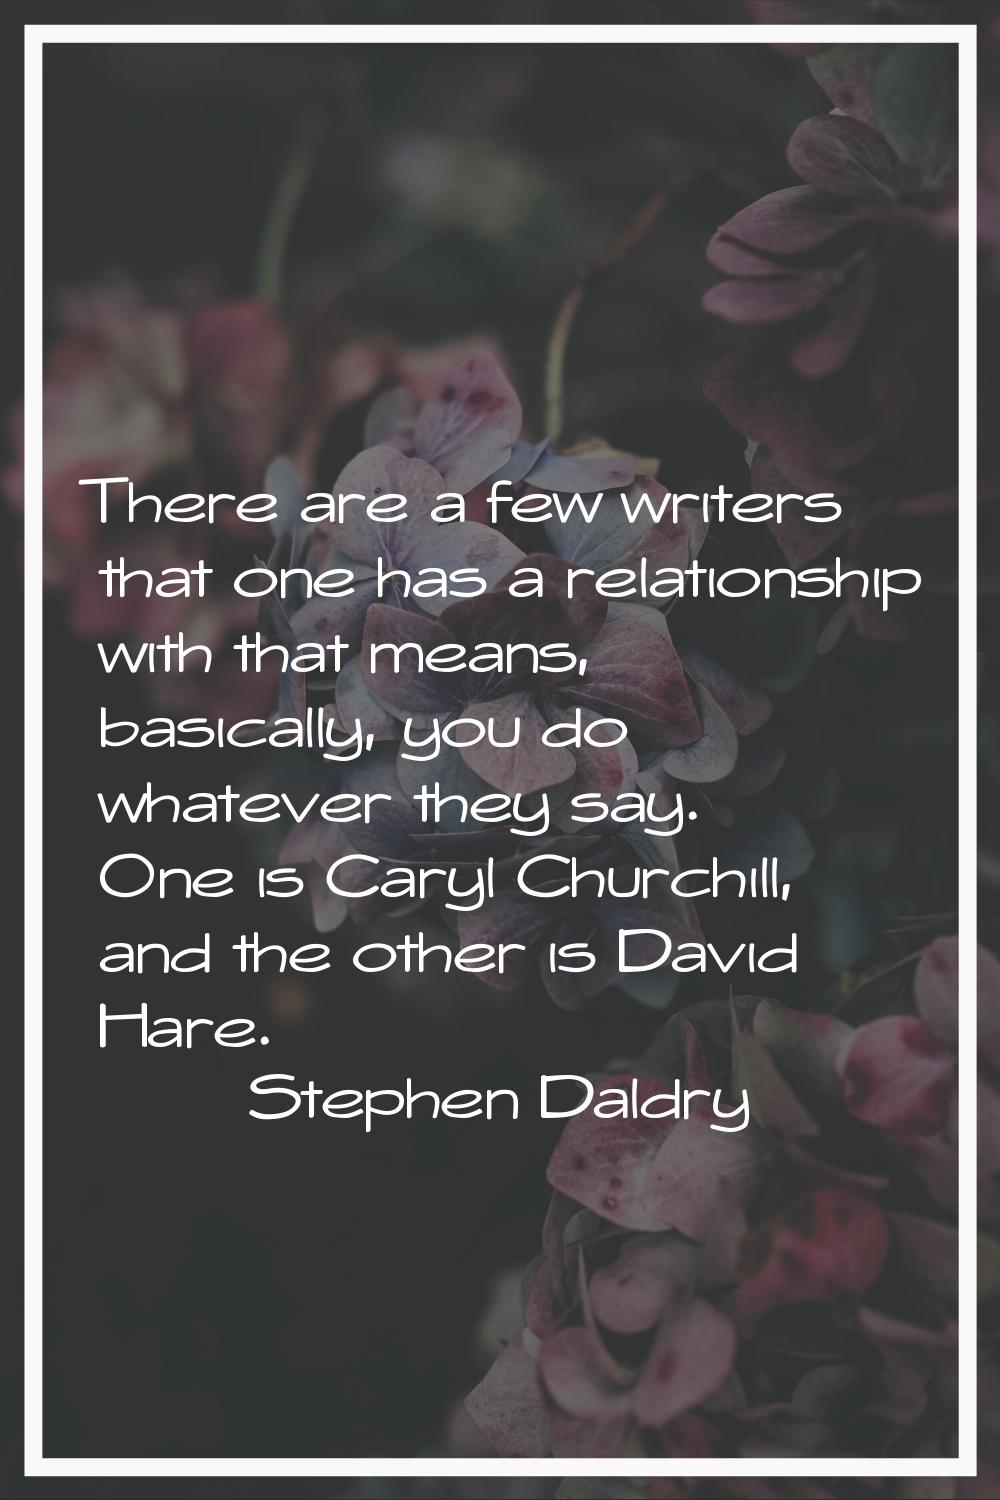 There are a few writers that one has a relationship with that means, basically, you do whatever the